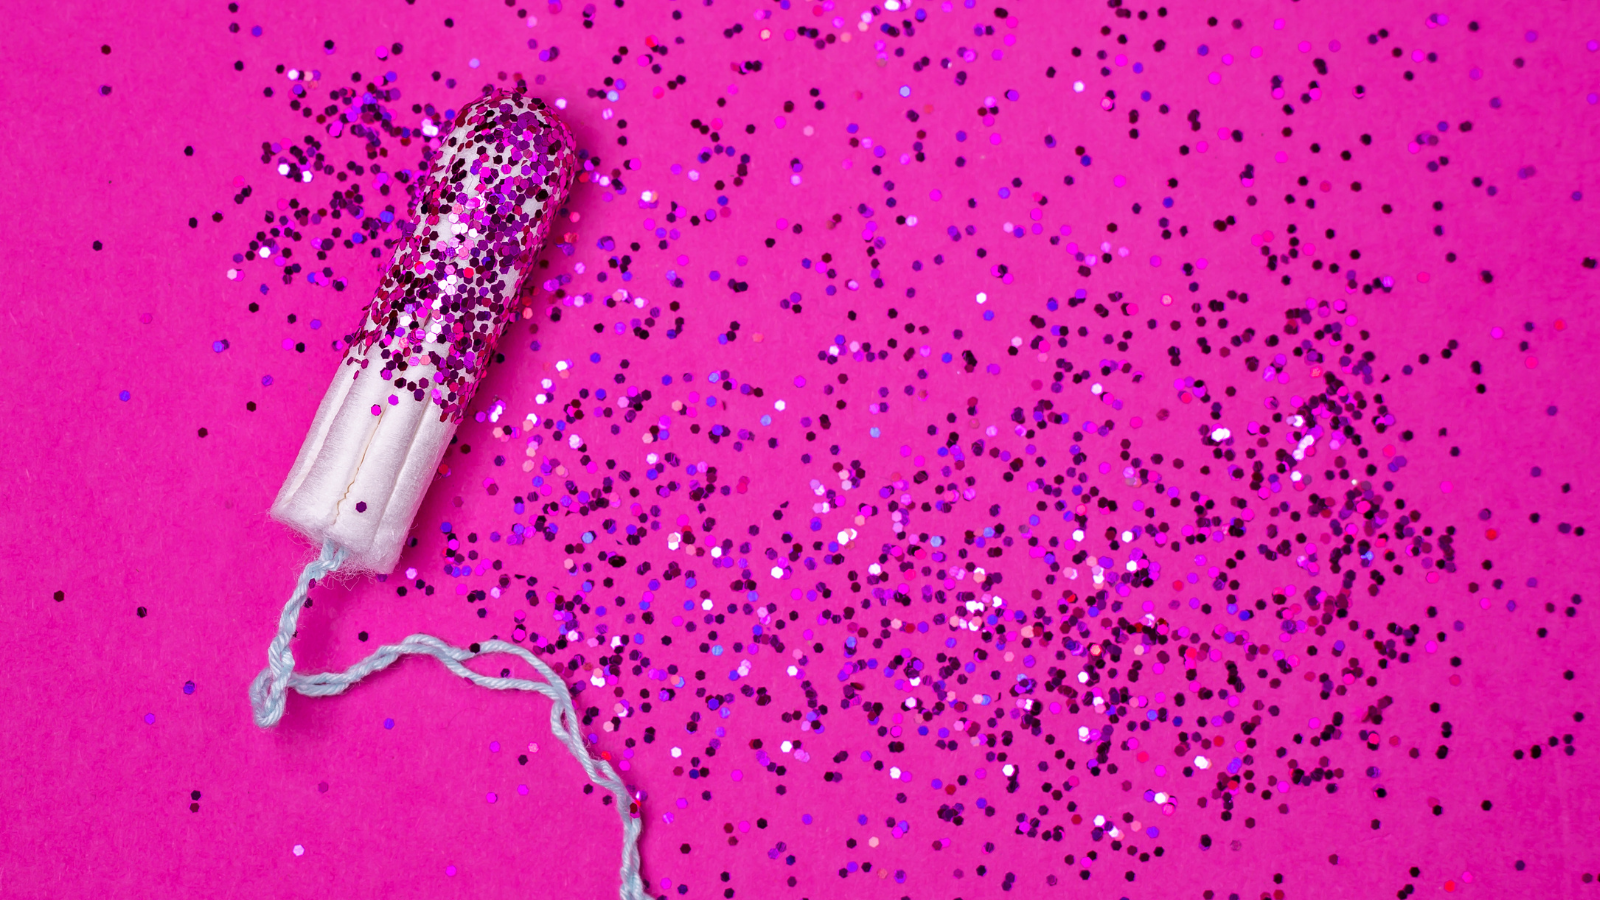 Periods don't pause for pandemics. Image of a tampon lying on lots of pink glitter